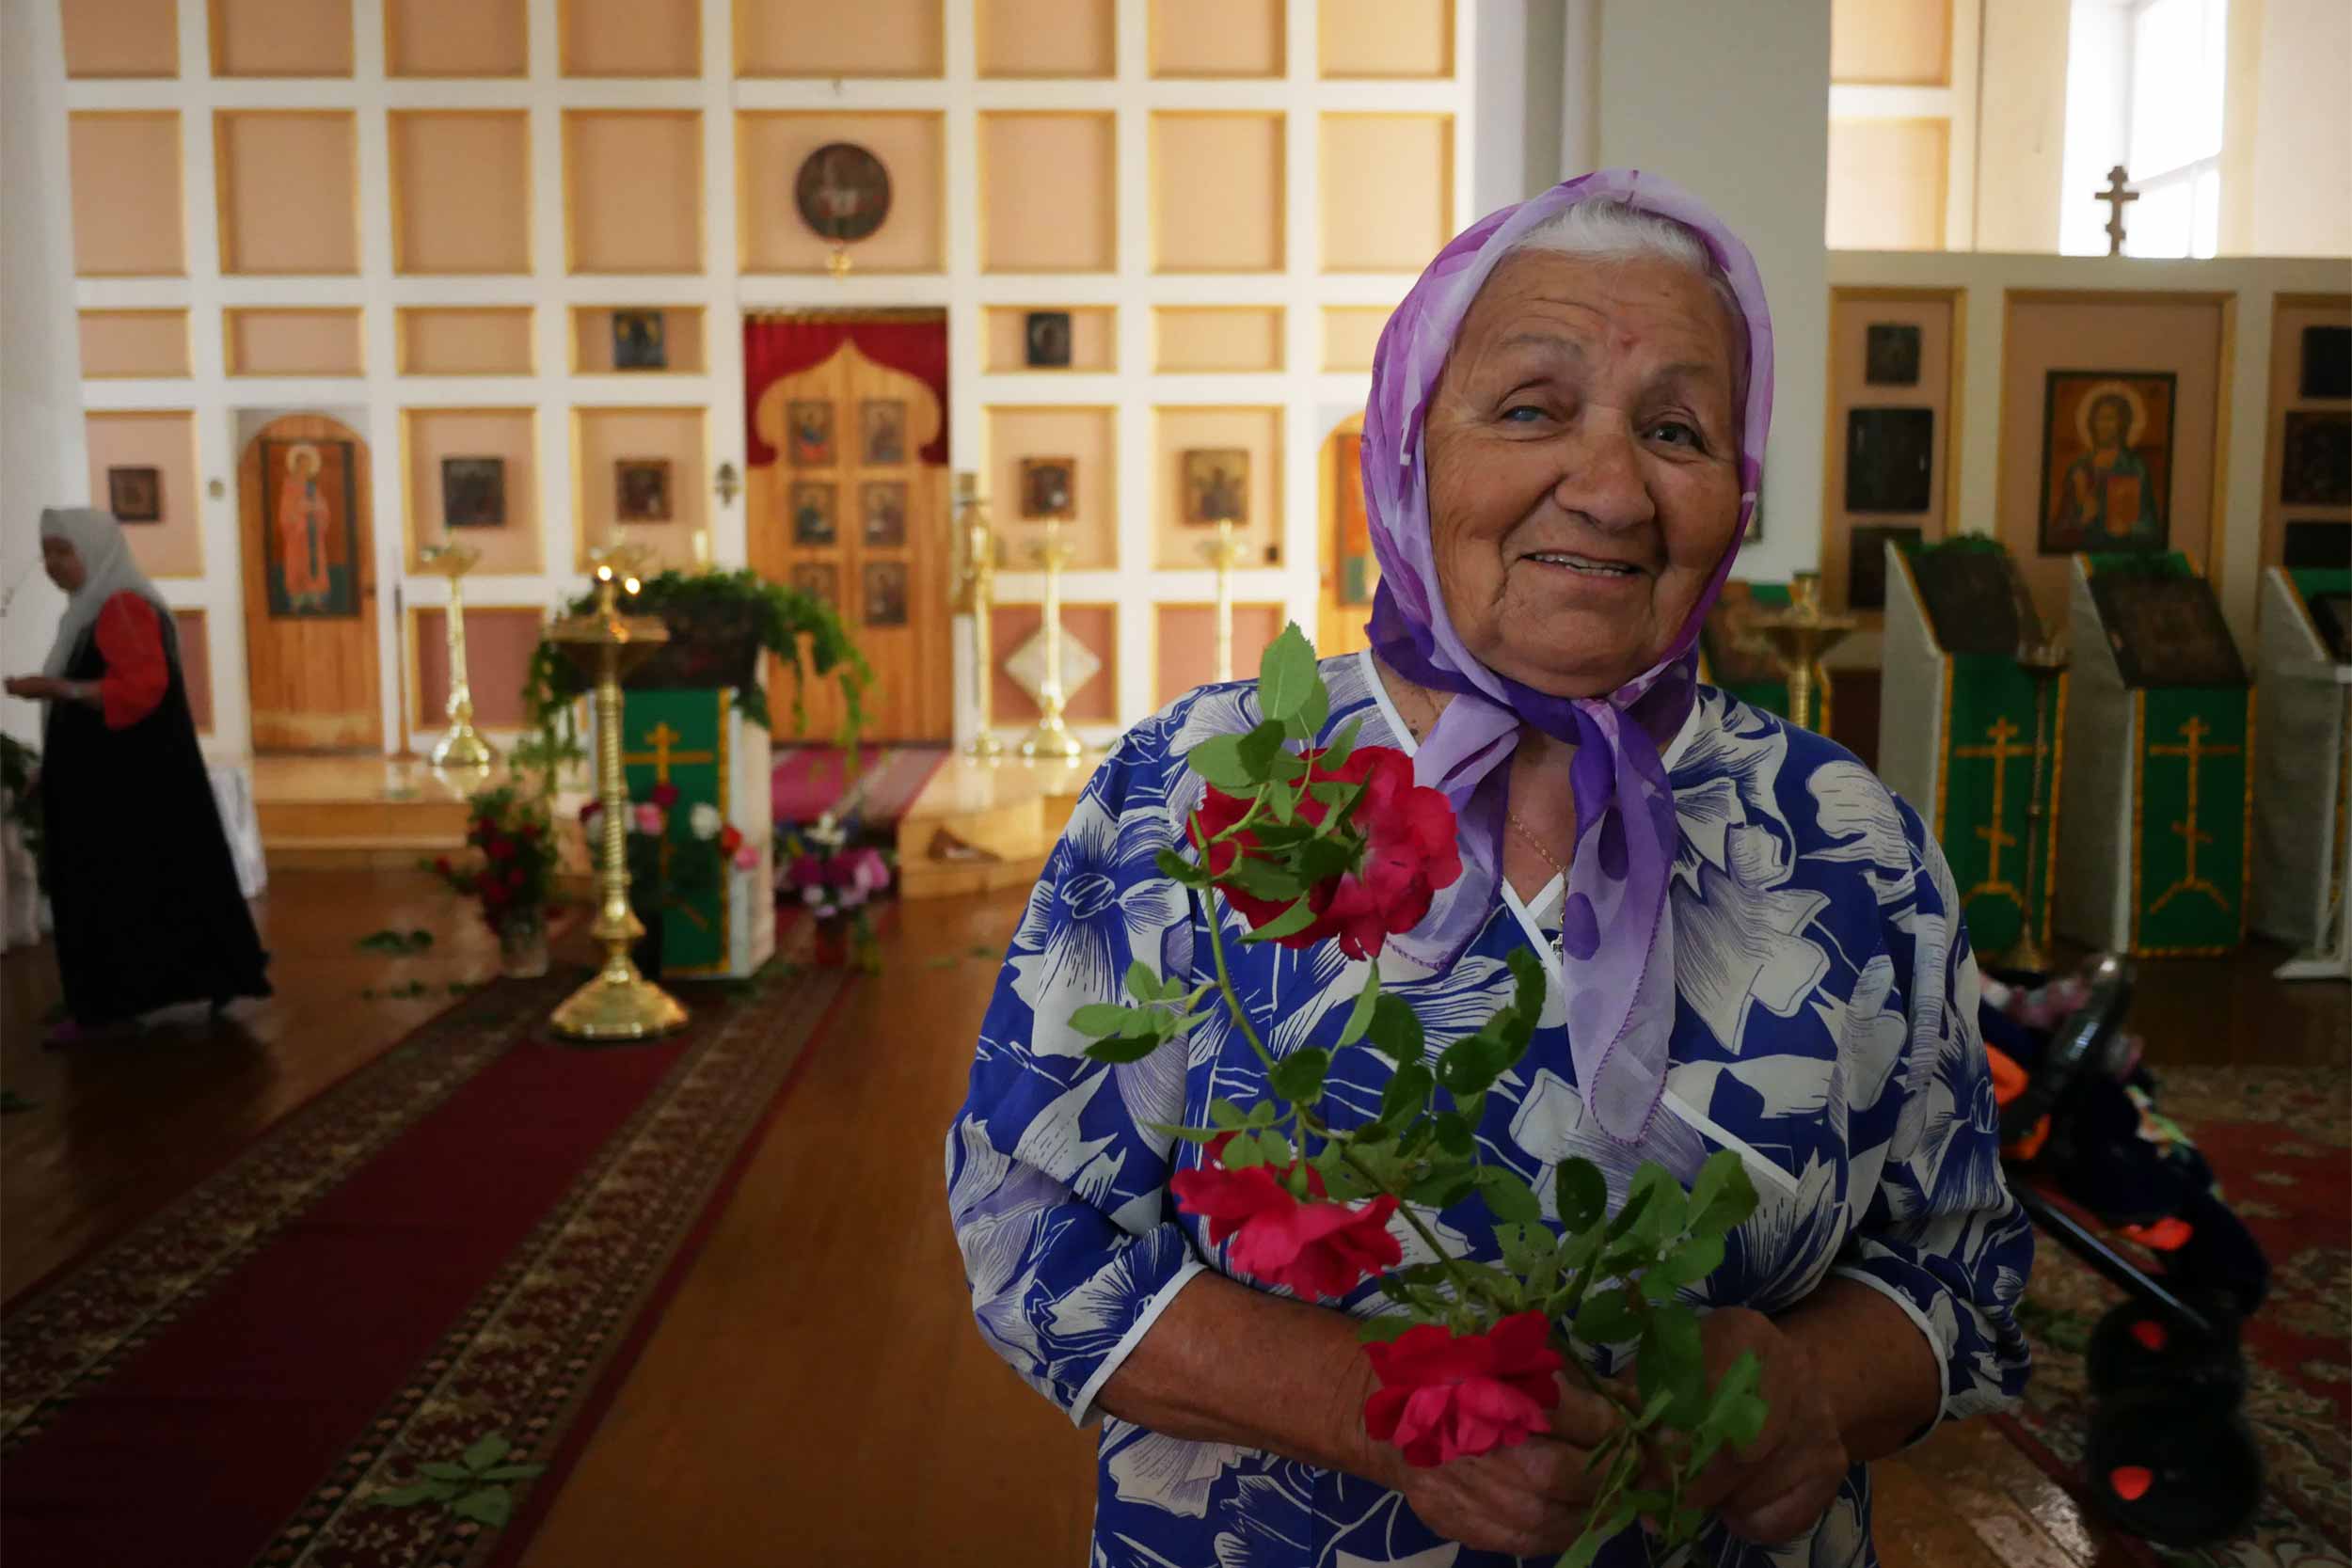 Olga Leontyevna is one of the 50 or so Old Believers in Uralsk. “I am an Old Believer, [like] my great-grandfathers and grandfathers. I have been coming to this temple for over 30 years. This is the very first faith where Orthodoxy began. We have more prayers and all our rules are stricter,” she said. © Talgat Umarov